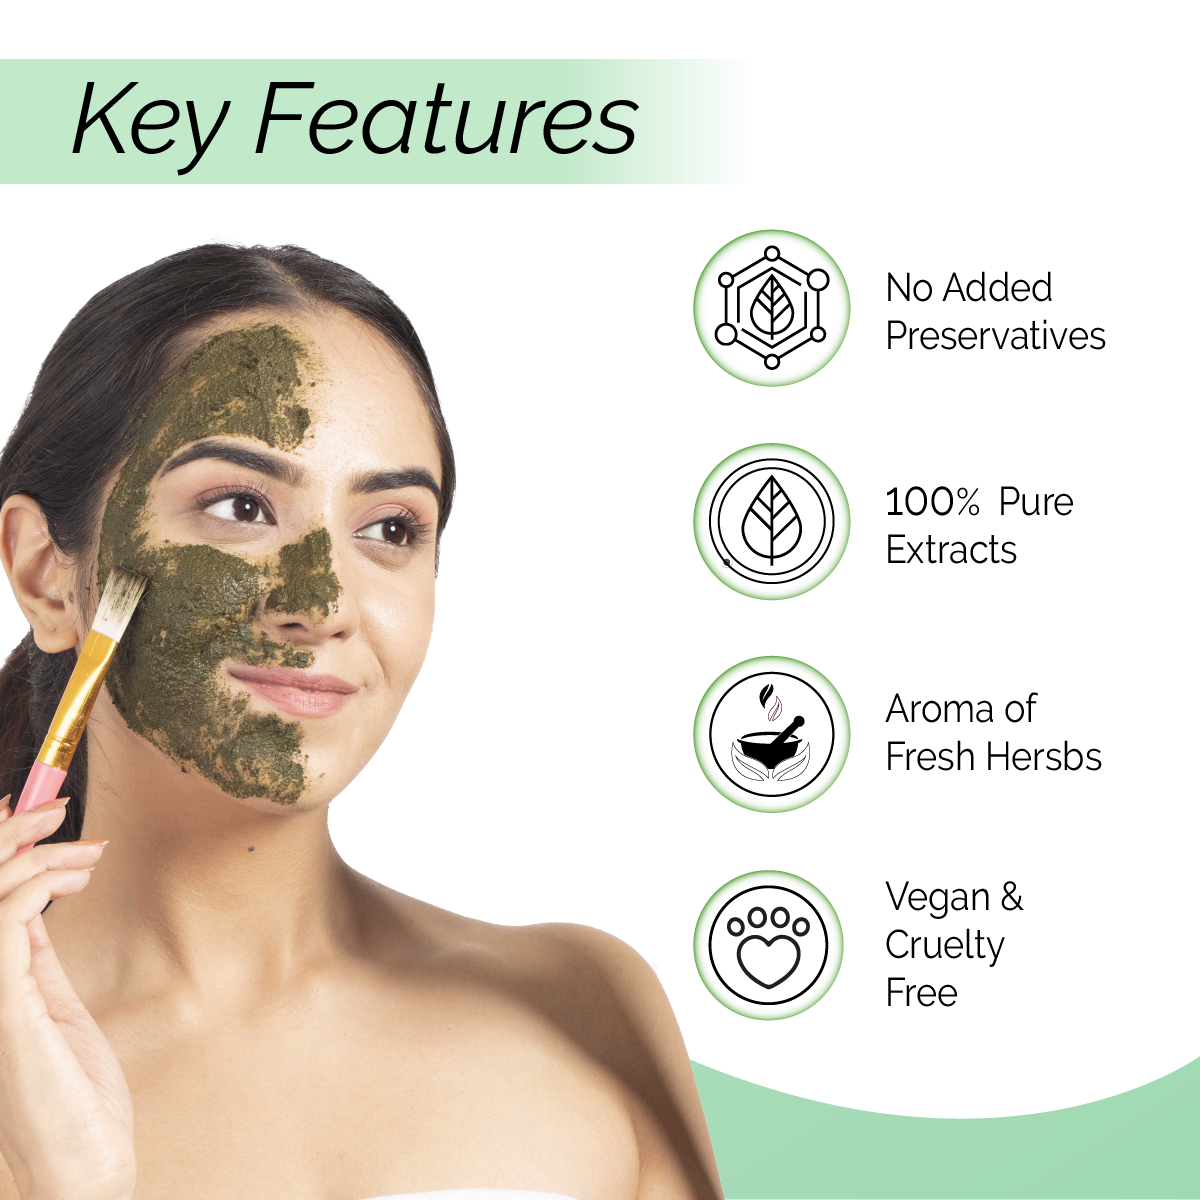 100% Natural Chemical Free Face Masks <h4>The anti-bacterial power for clear skin<h4><h6> Hygienically dried to preserve the skin caring actives.  No preservatives added.<h6>